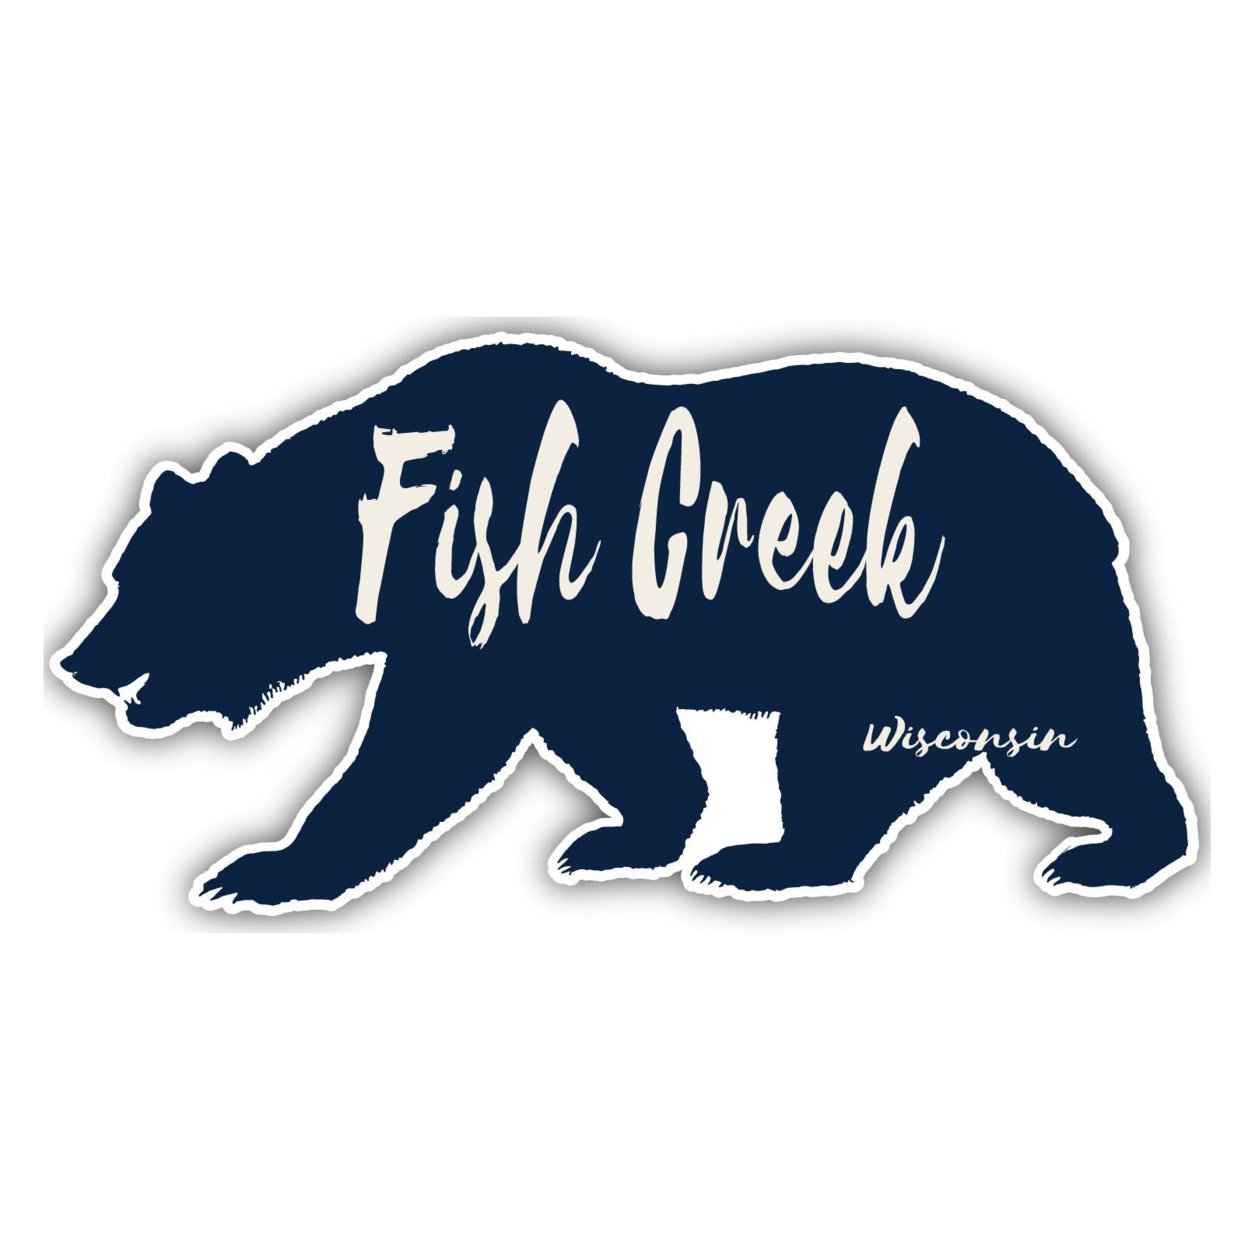 Fish Creek Wisconsin Souvenir Decorative Stickers (Choose Theme And Size) - 4-Pack, 2-Inch, Bear